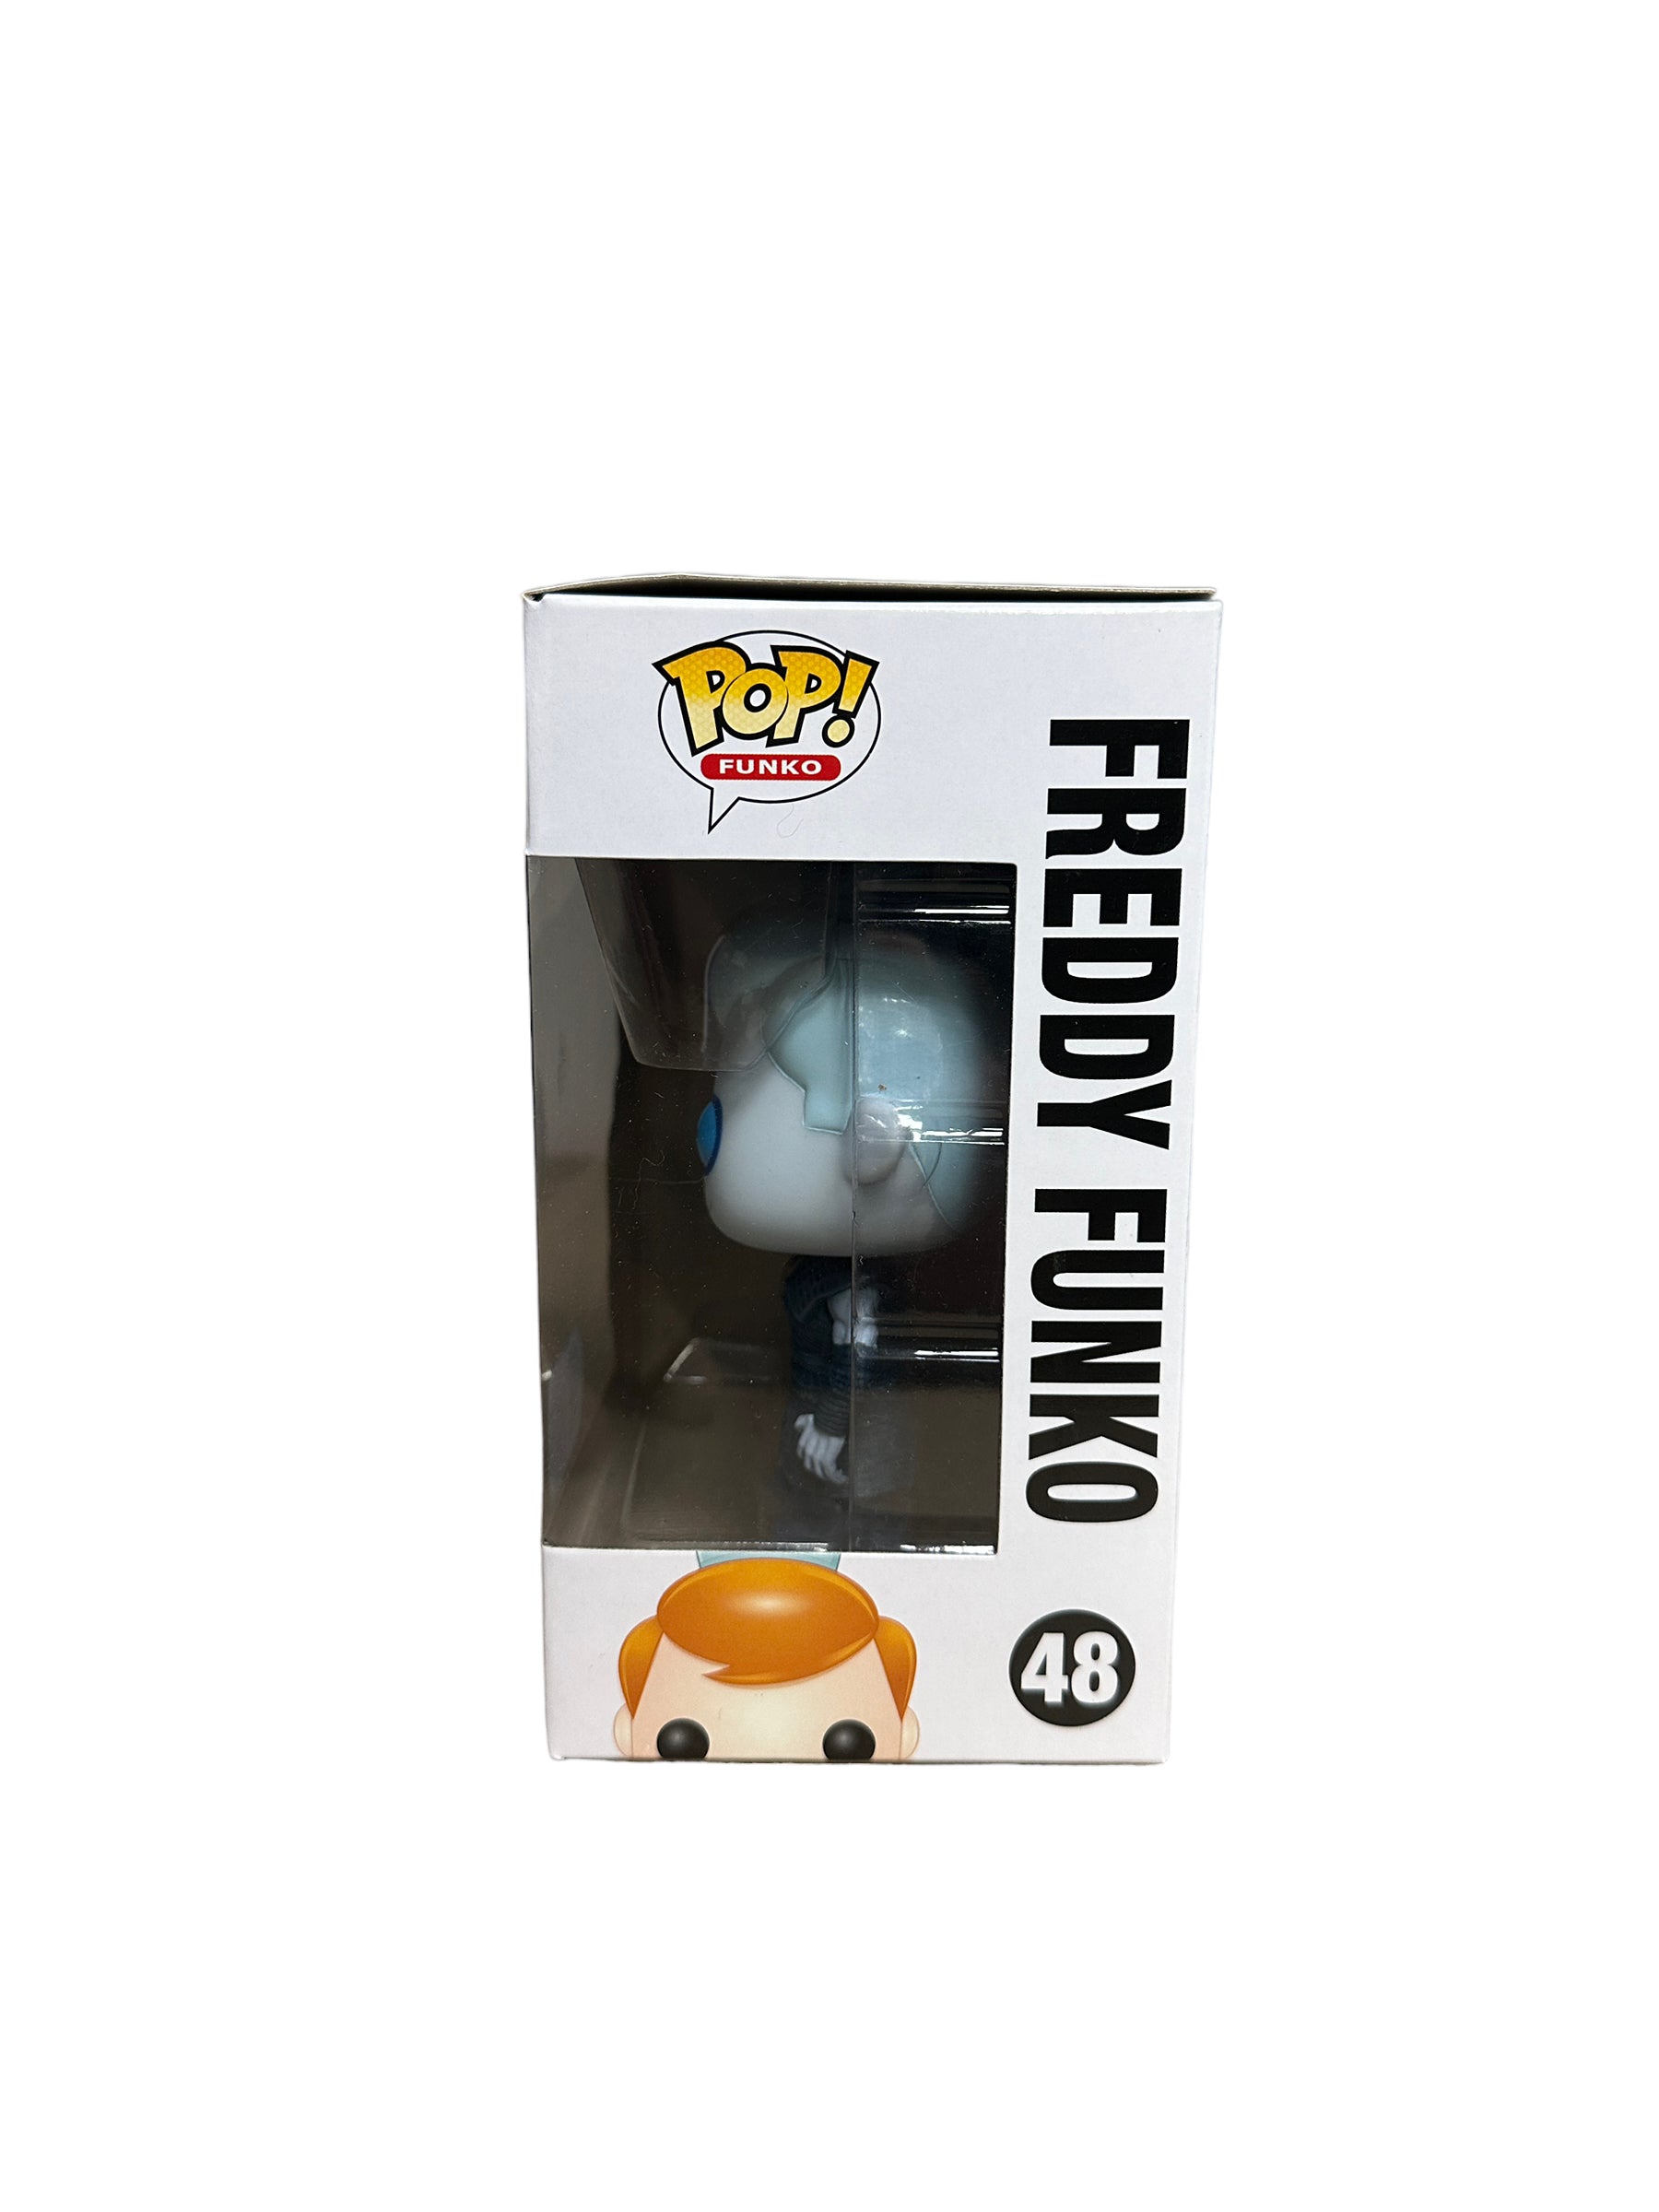 Freddy Funko as The Night King #48 Funko Pop! - Game of Thrones - SDCC 2016 Exclusive LE400 Pcs - Condition 7.5/10